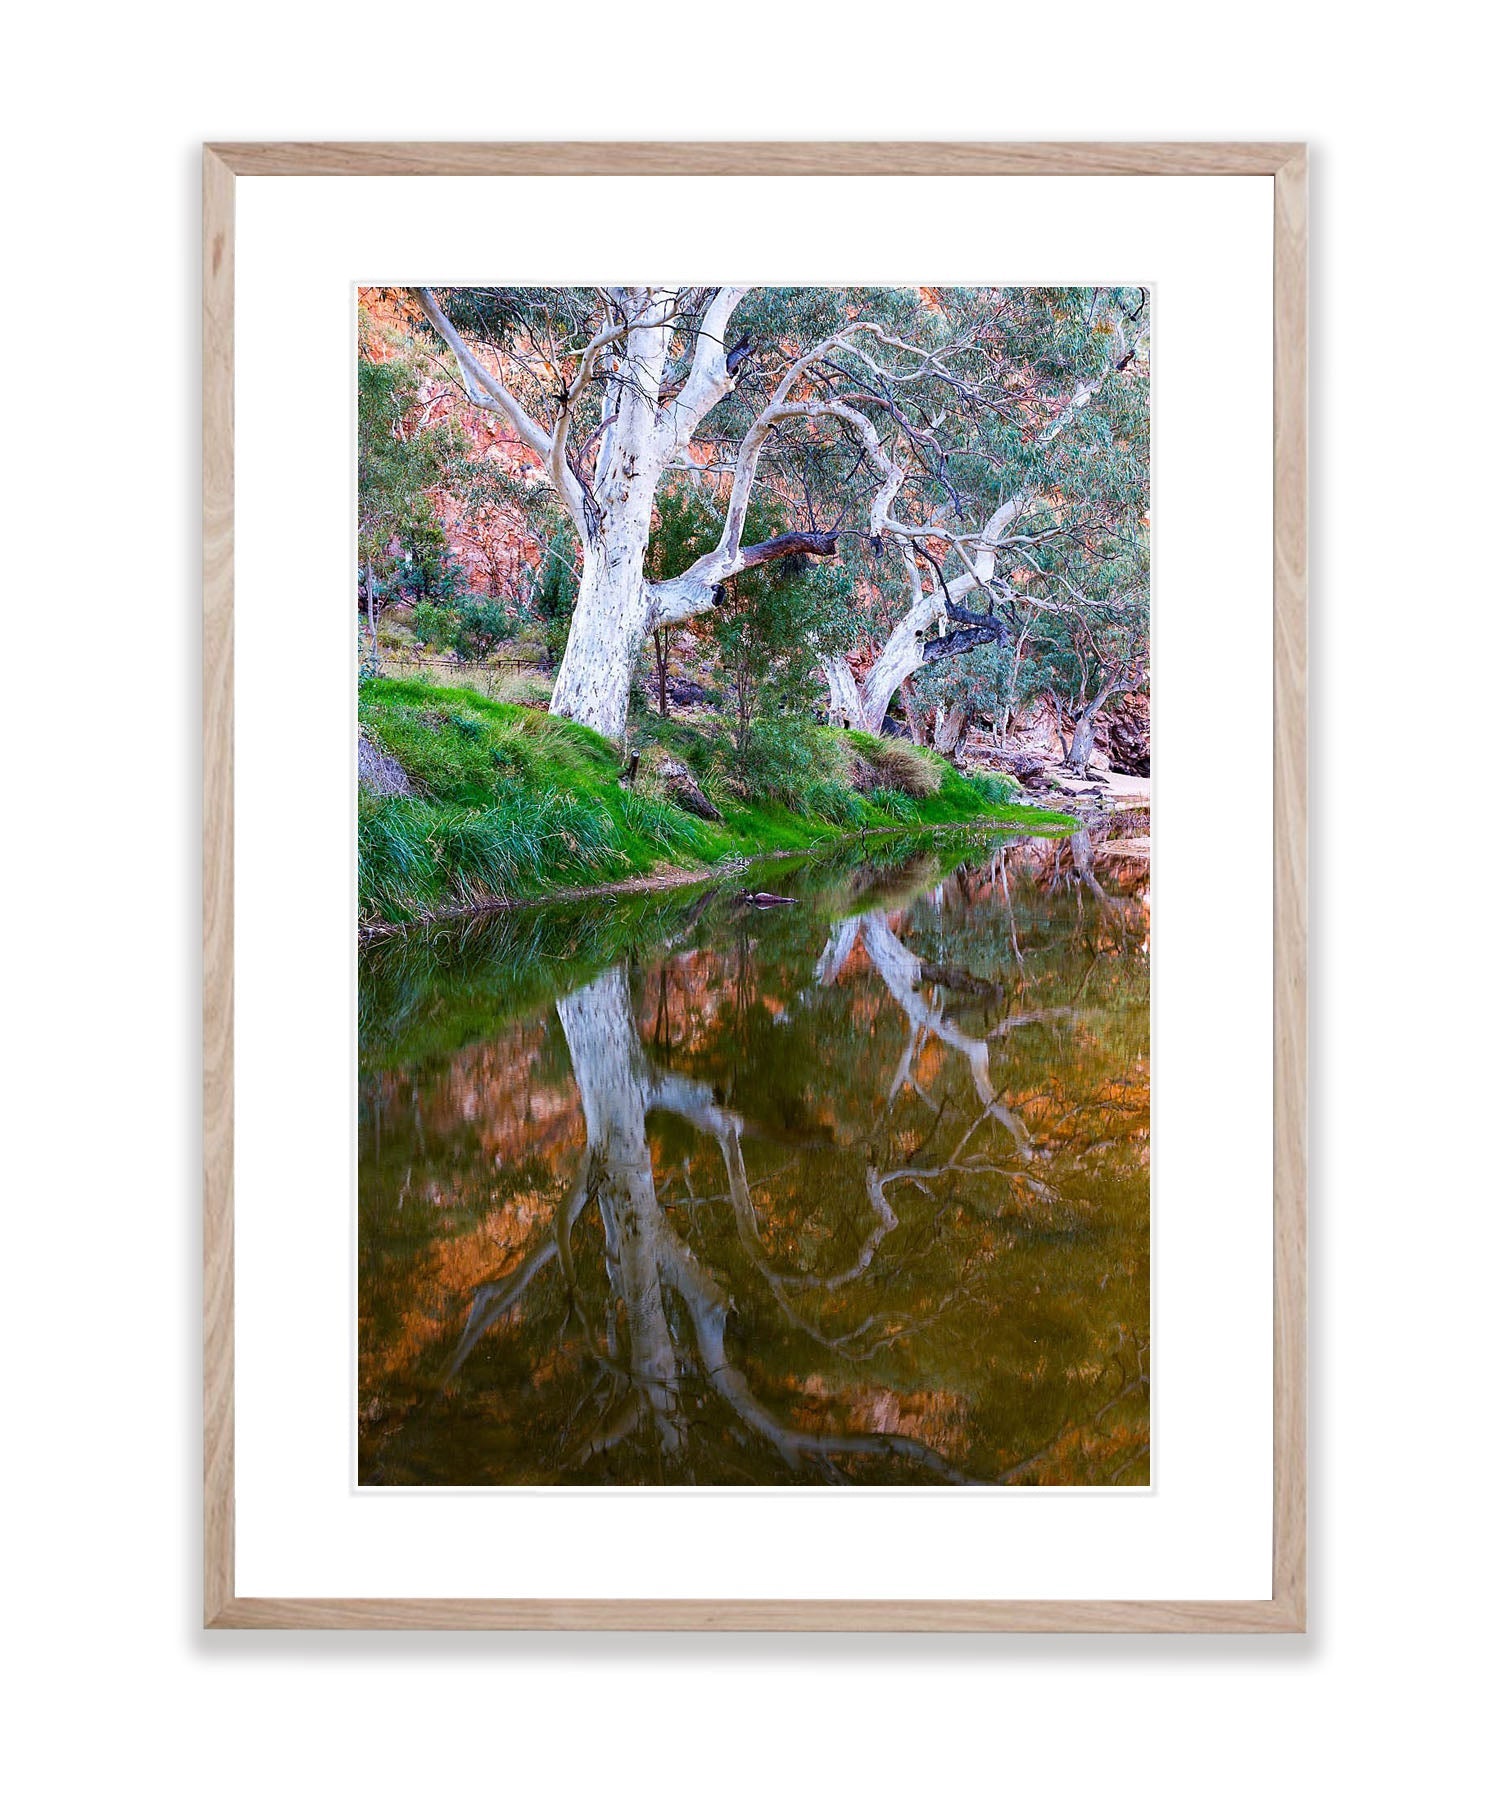 River Red Gum Reflection, West MacDonnell Ranges - Northern Territory